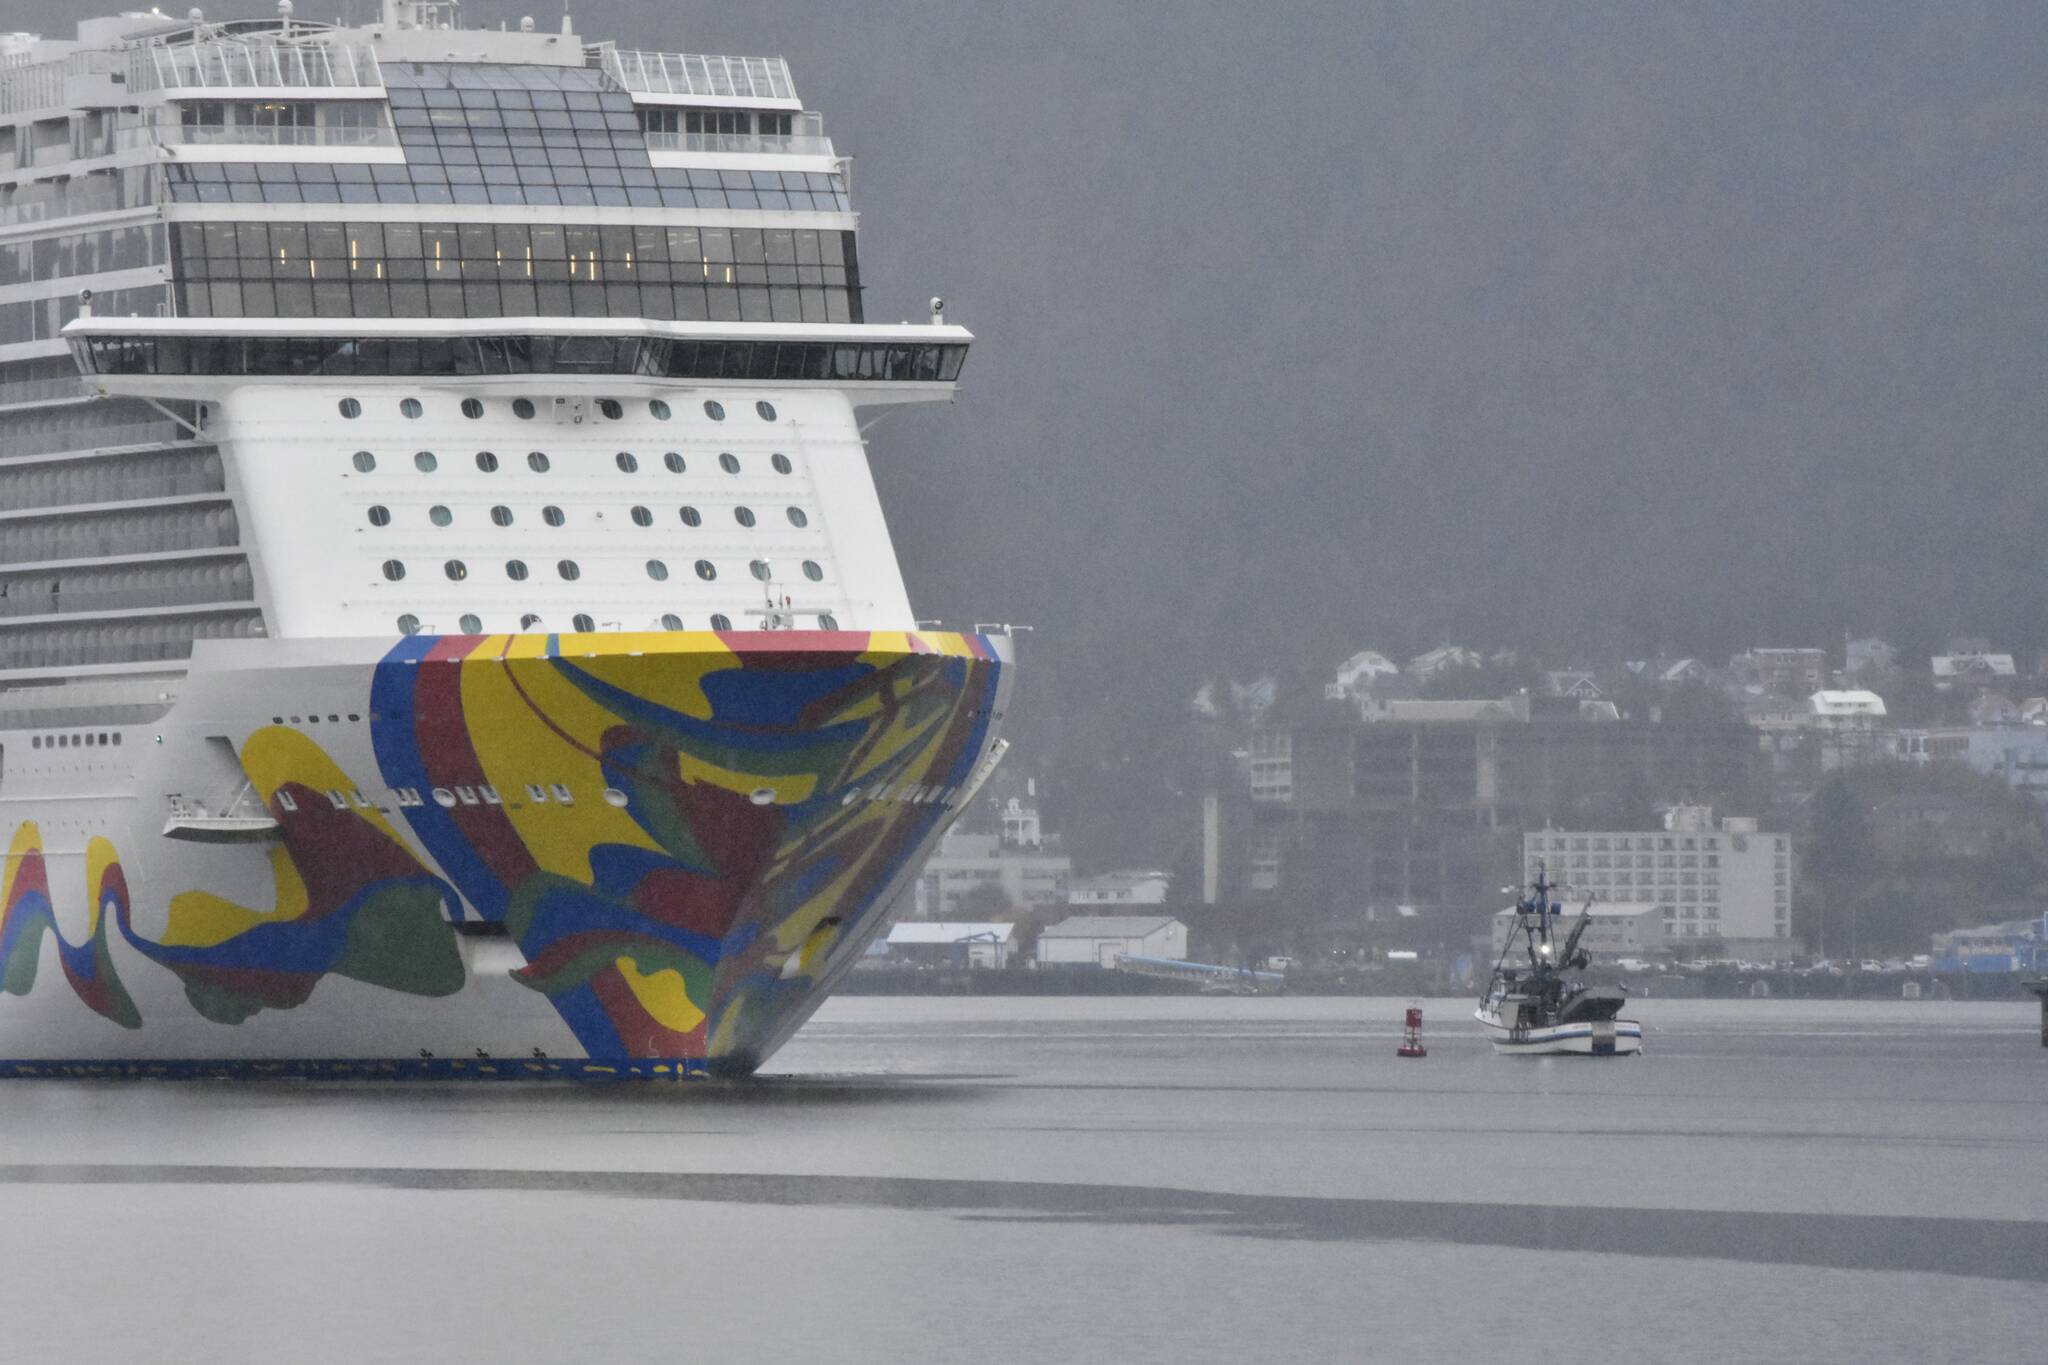 The last cruise ship of the year, the Norwegian Encore, sails out of Juneau on Wednesday, Oct., 20, 2021, ending a cruise ship season that almost didn't happen. Despite a smaller season this year, local officials expect a robust season in 2022. (Peter Segall / Juneau Empire)